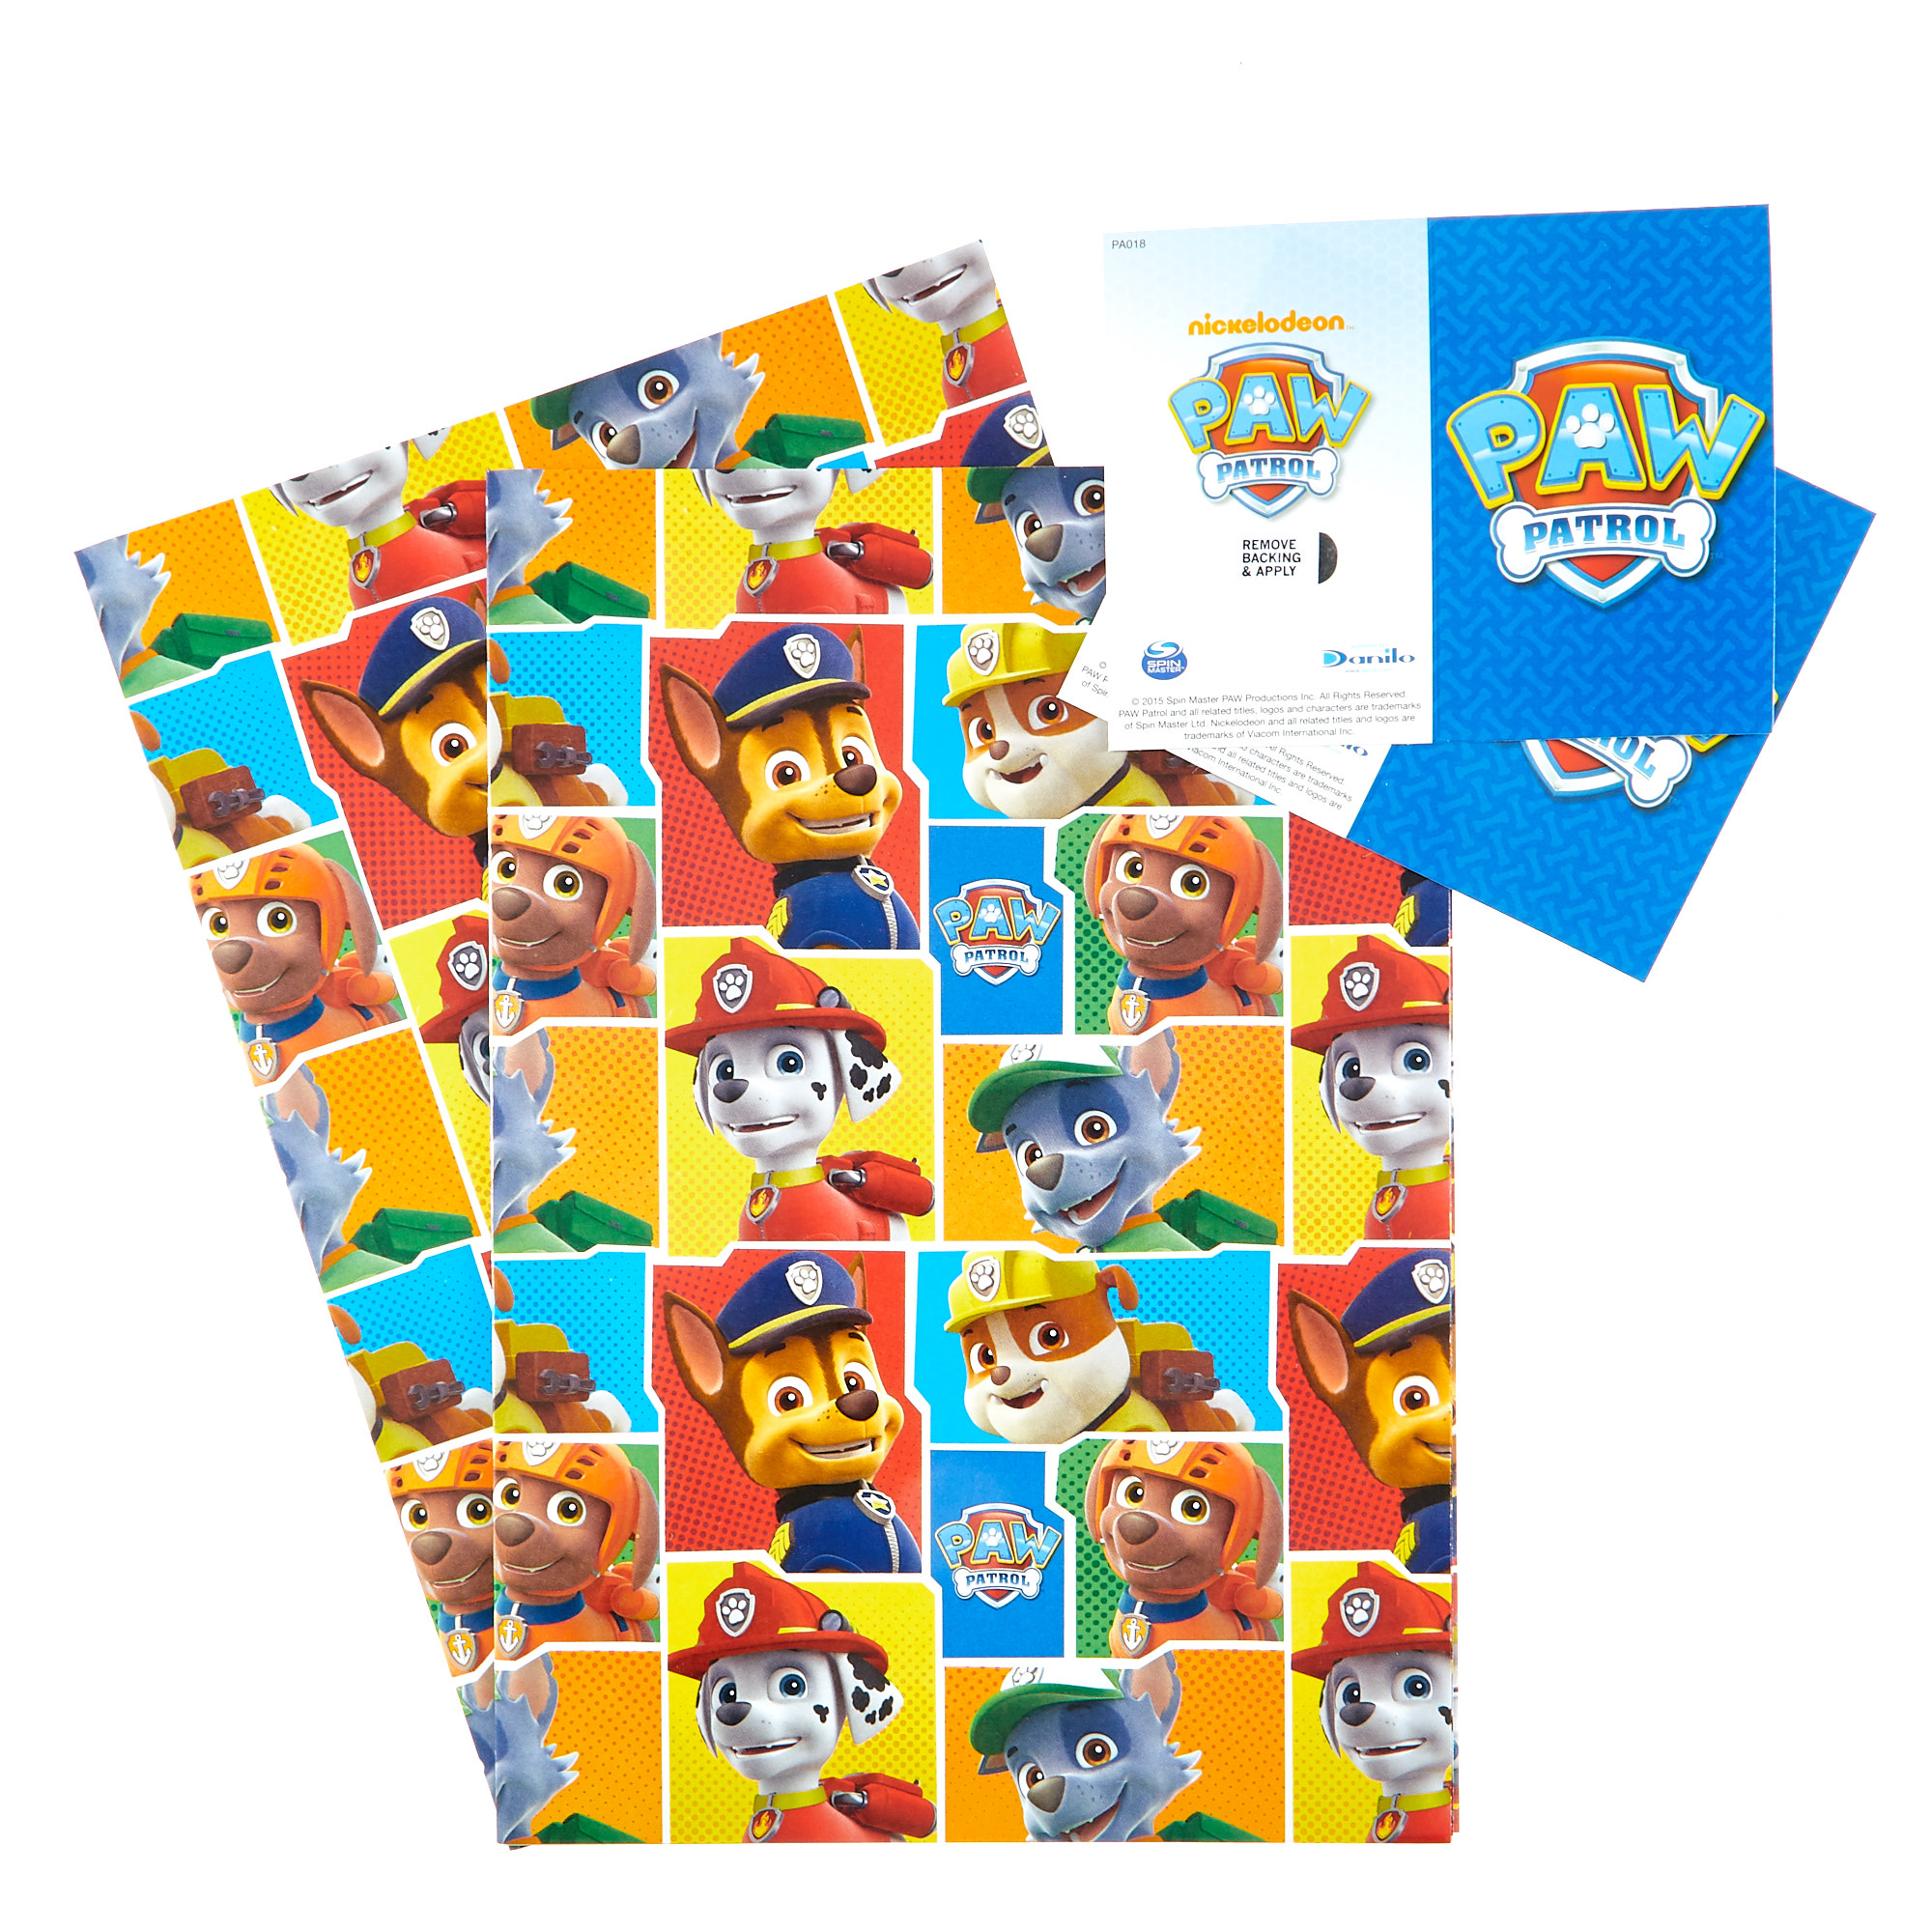 2 SHEETS PAW PATROL WRAPPING PAPER & 2 GIFT TAGS 70 x 50 cms BNWT NEVER USED 